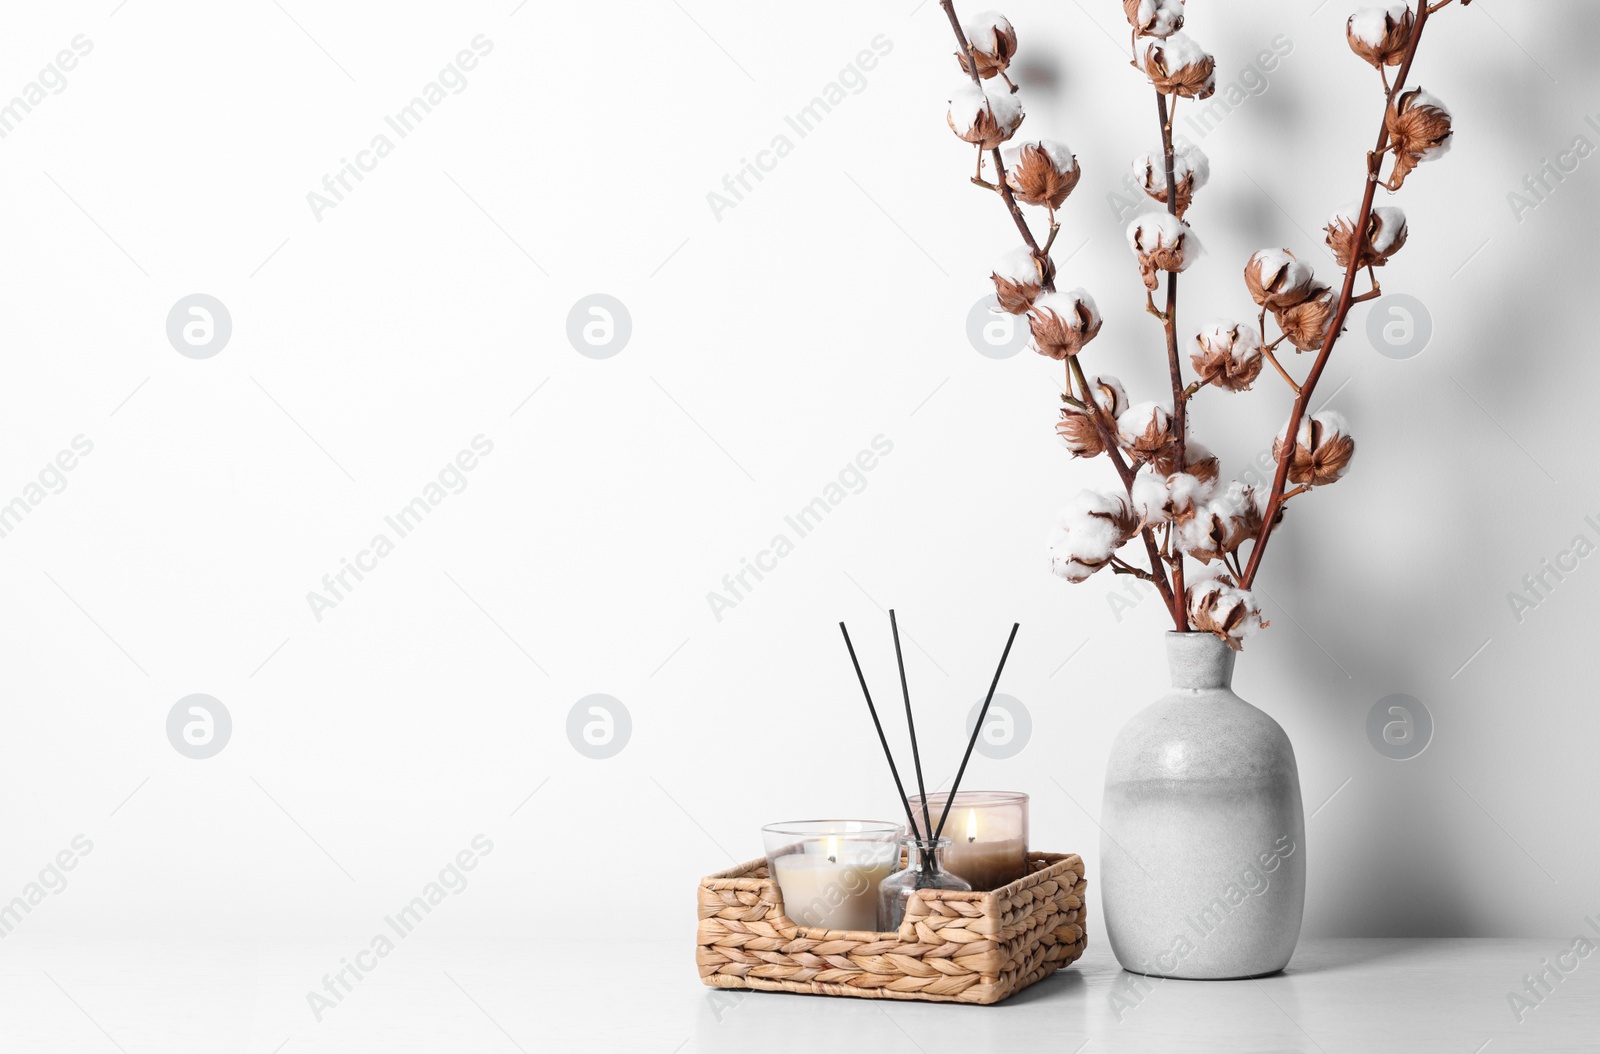 Photo of Burning candles in wicker basket and vase with cotton branches on table against white background. Space for text